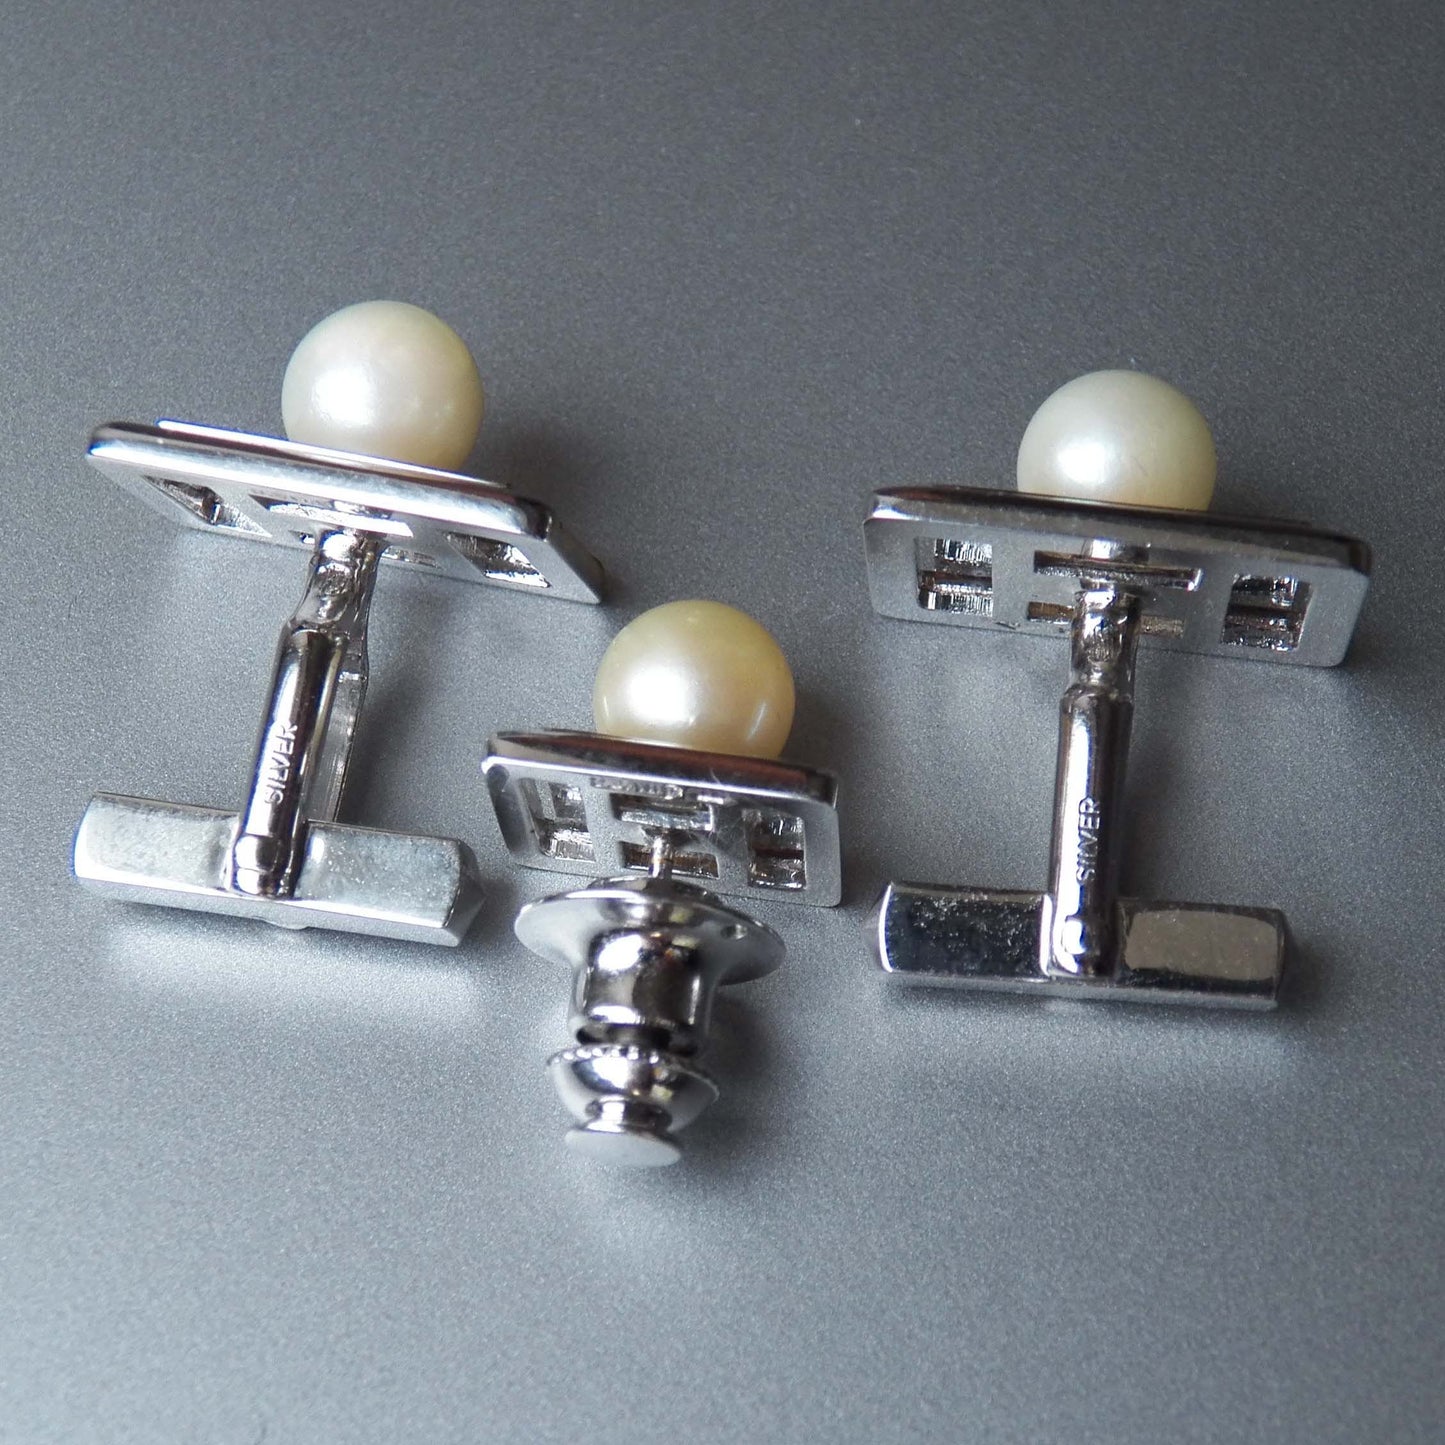 Akoya Pearl Cufflinks and Tie Tack Pin Set, Sterling Silver Gemstone Jewelry for Men